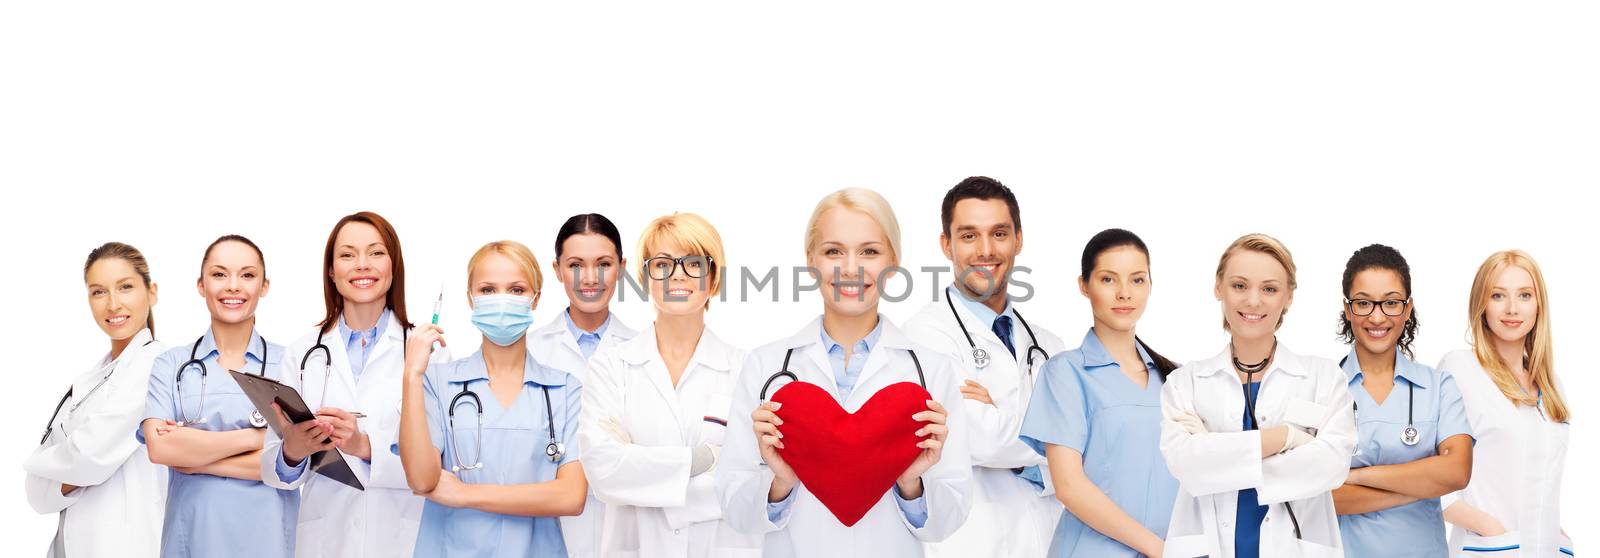 smiling doctors and nurses with red heart by dolgachov